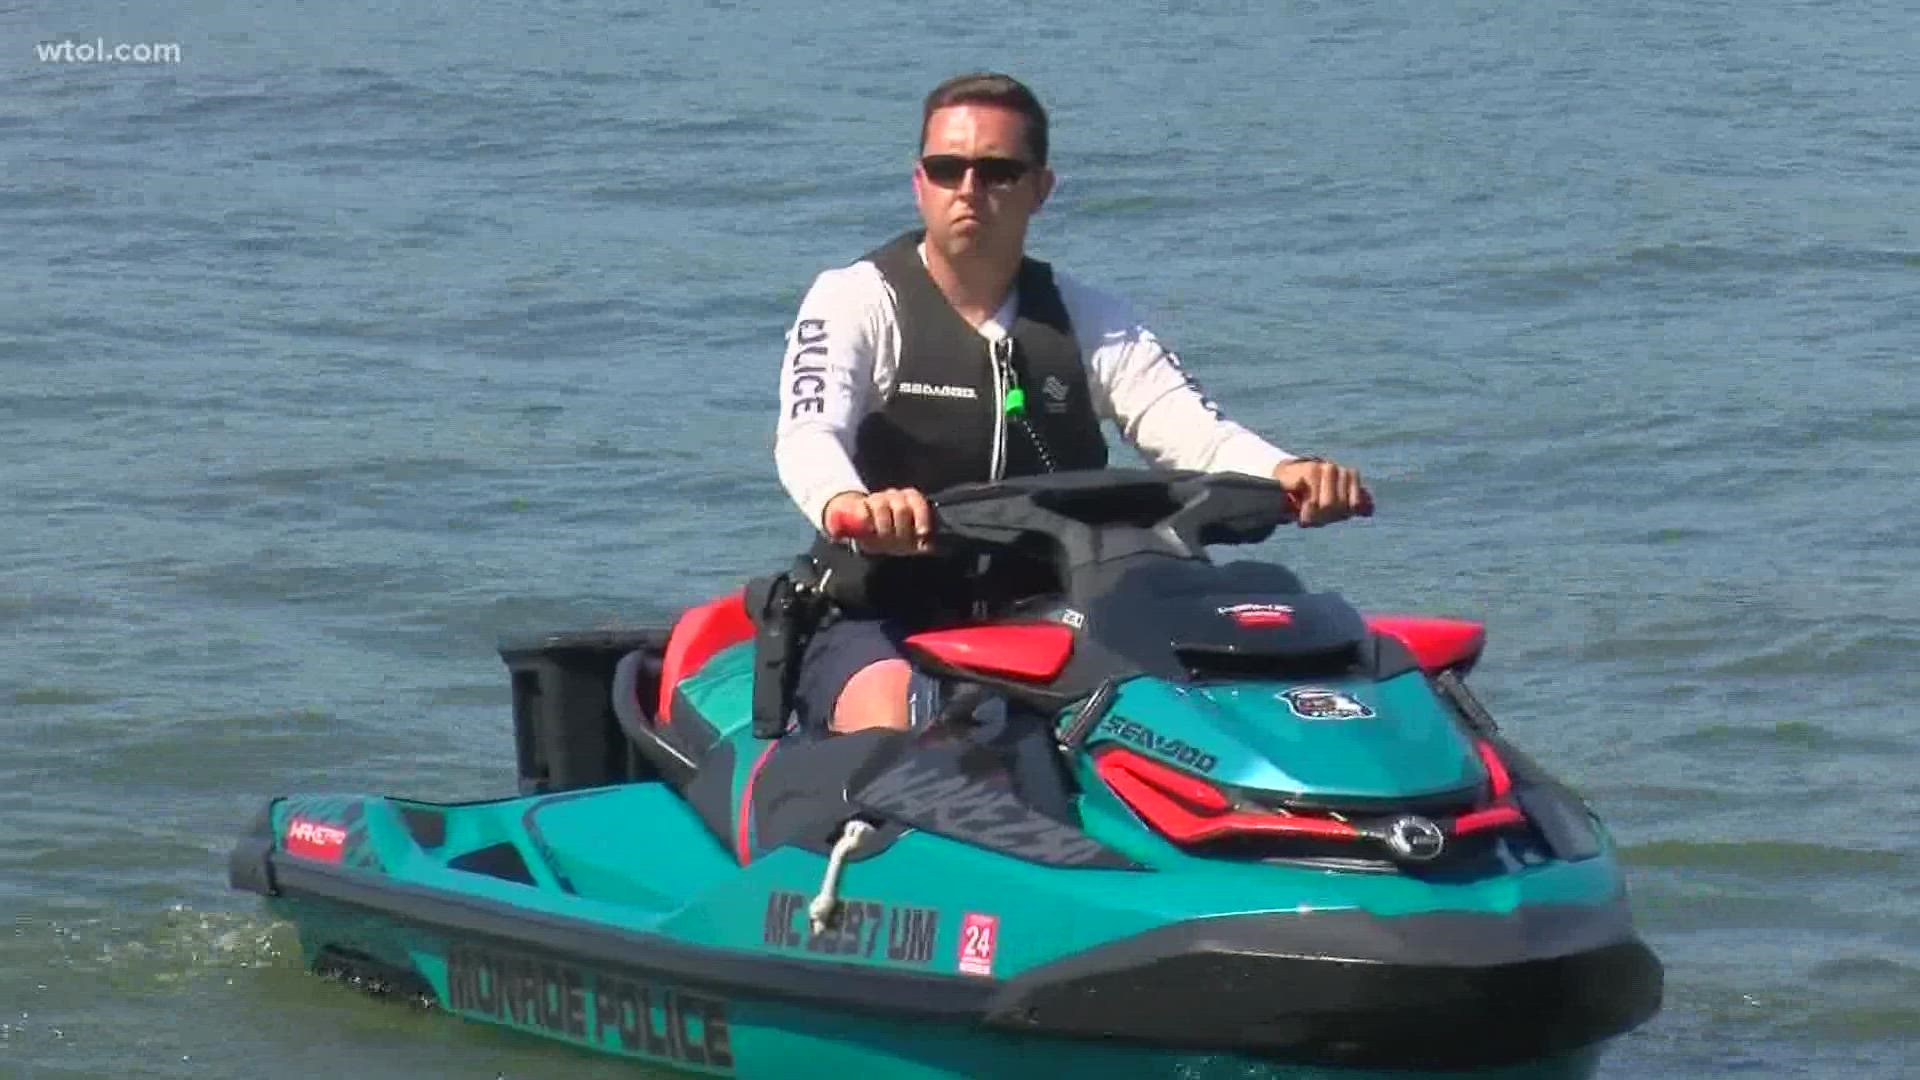 The new jet skis will help them respond to distressed boater and rescue calls that happen multiple times a year.